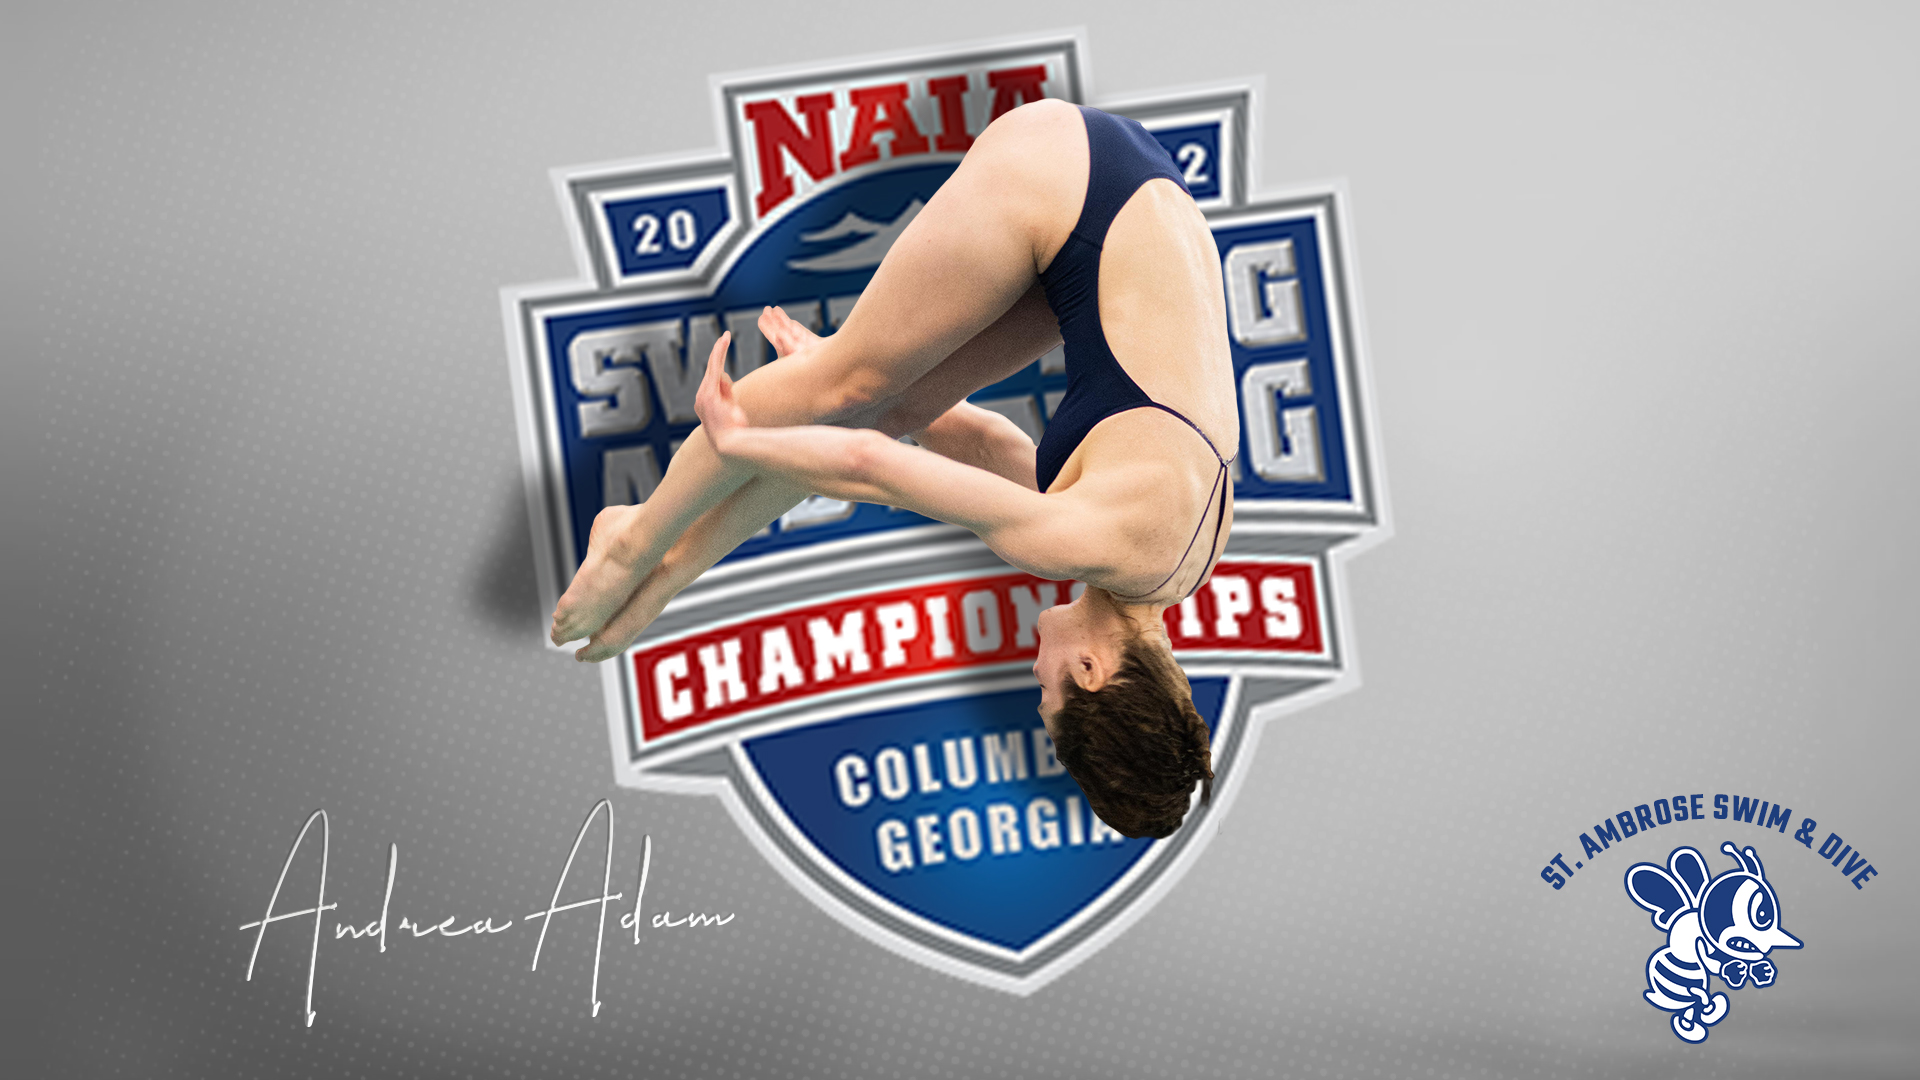 Adam wins seventh National Title; Bees crown multiple All-Americans